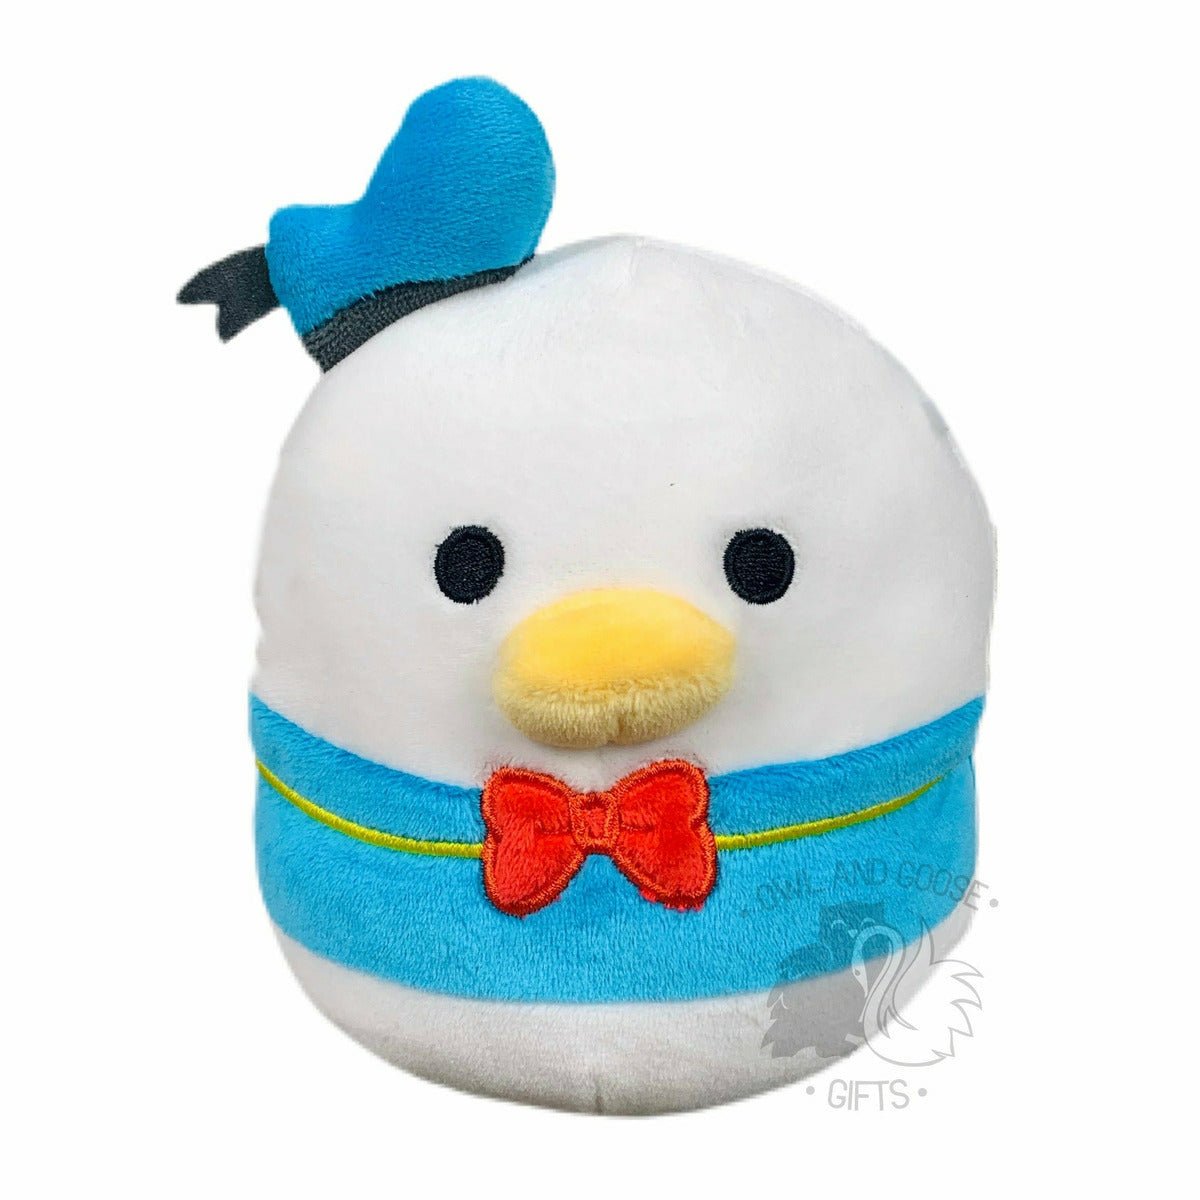 Squishmallow 5 Inch Donald Duck Disney Plush Toy - Owl & Goose Gifts